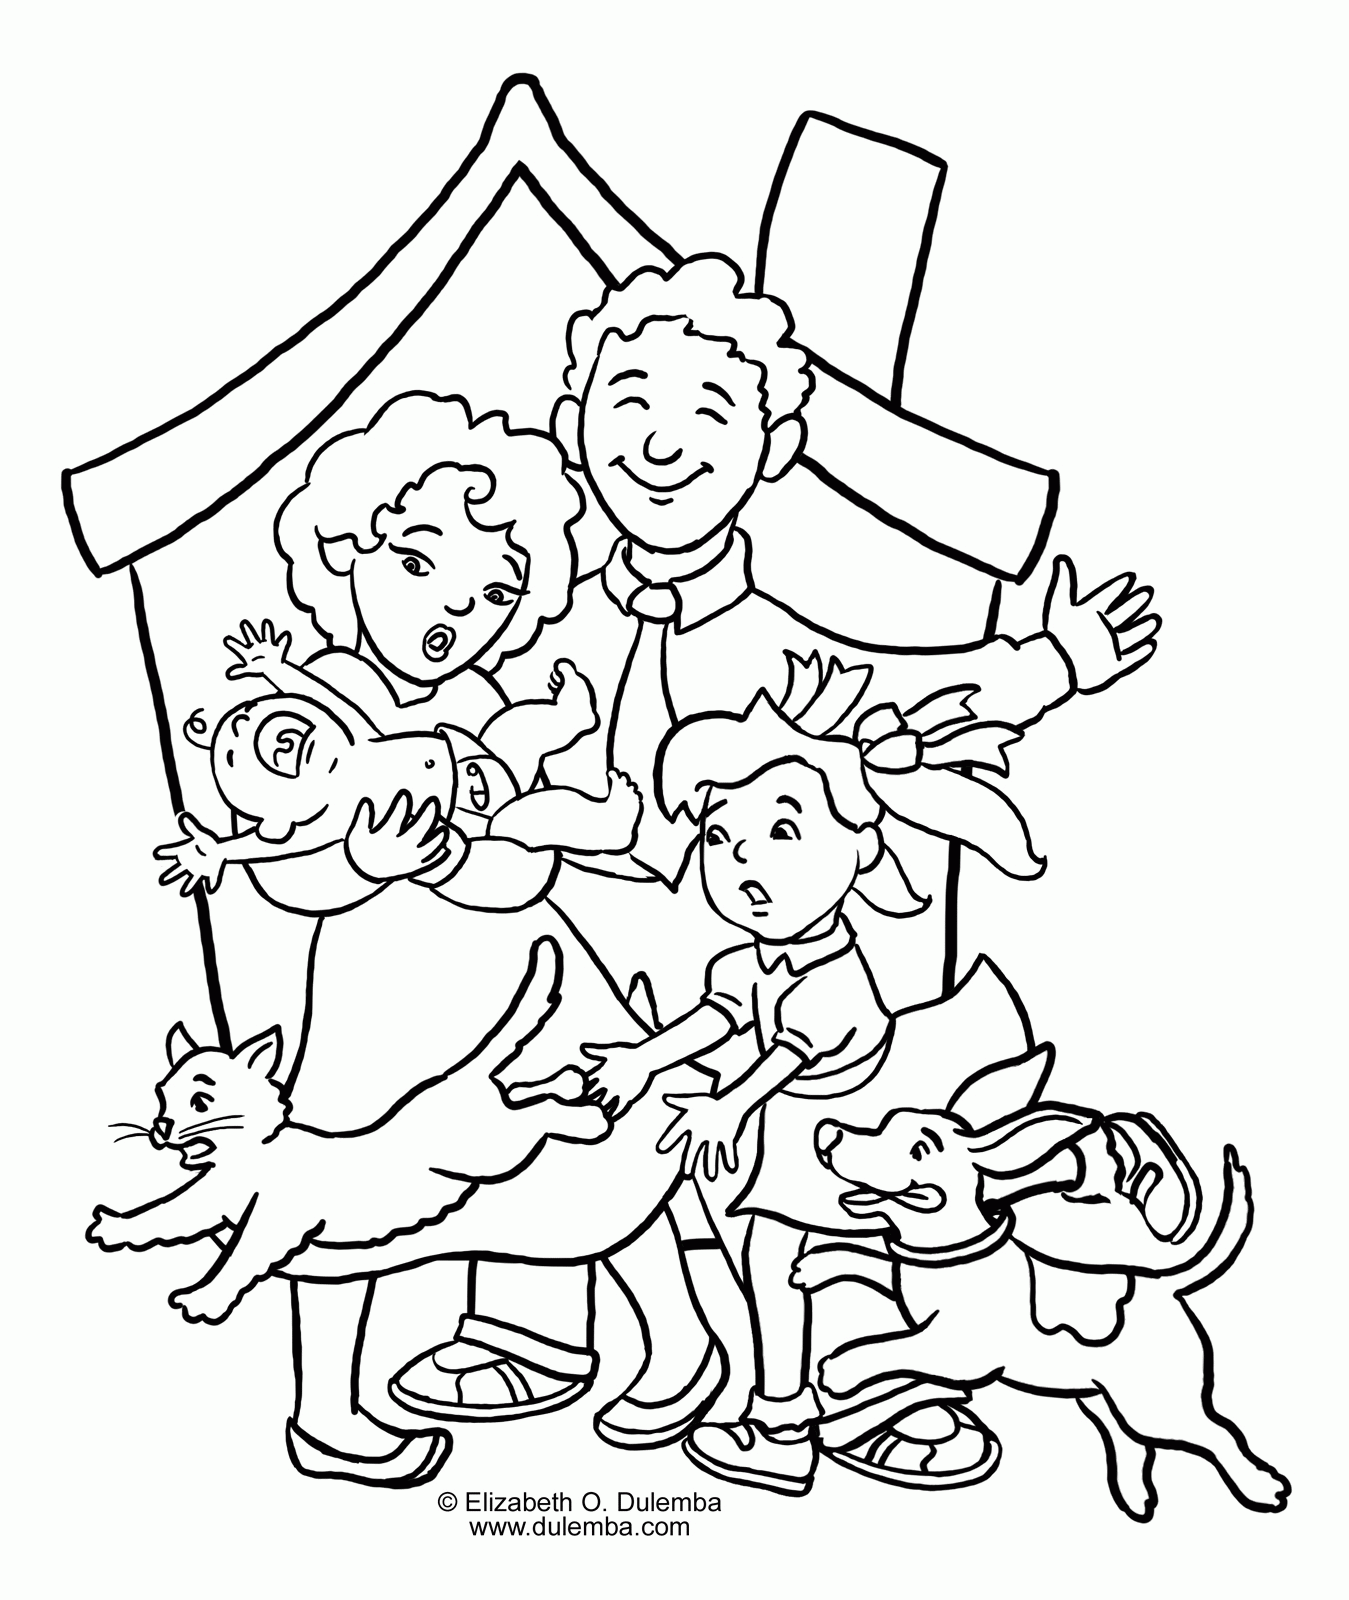 Coloring Page Of A Family - Coloring Home